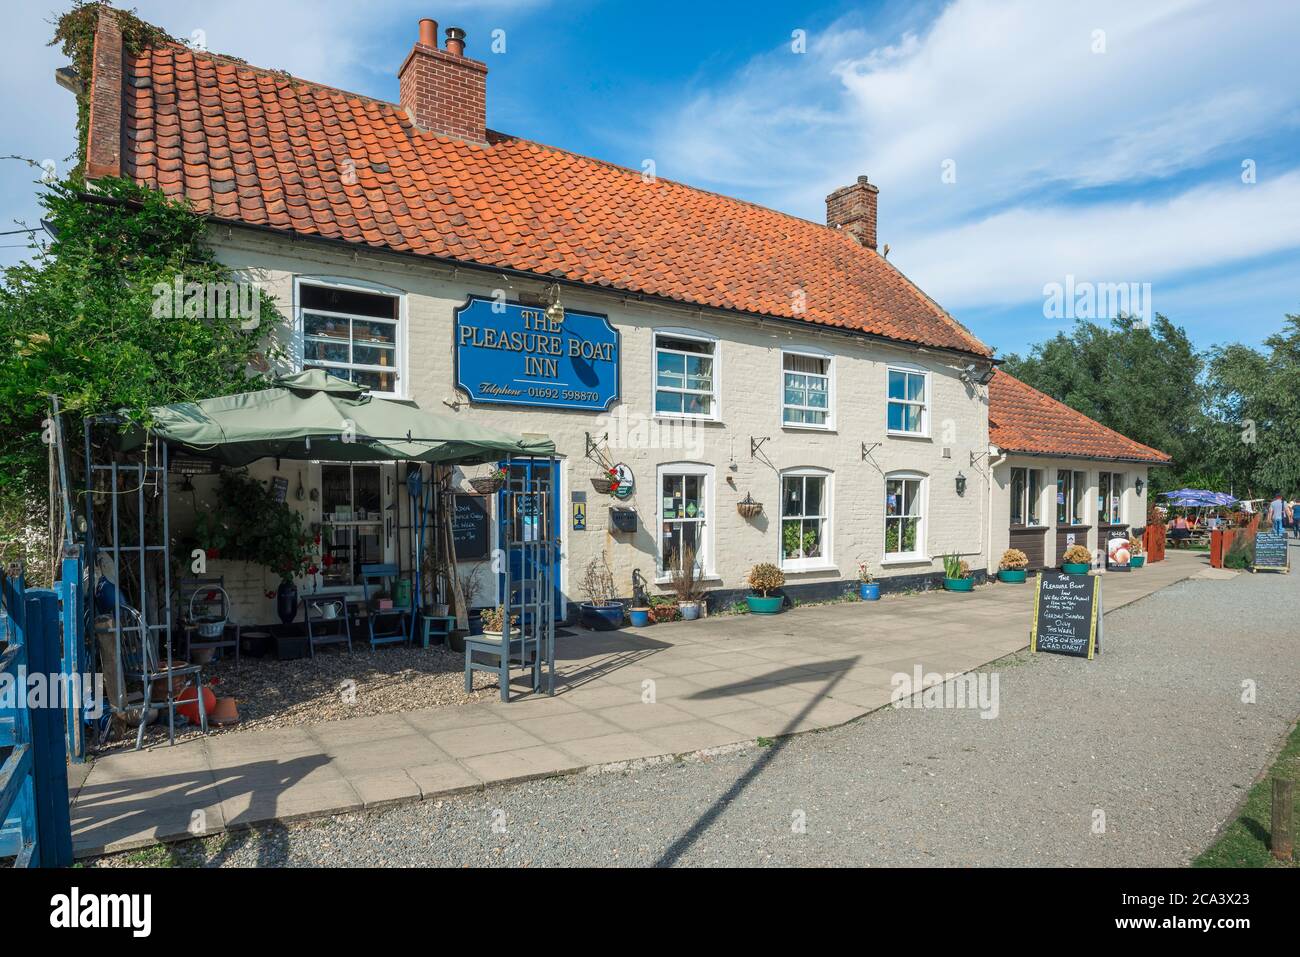 Pleasure Boat Inn, view of the Pleasure Boat Inn - a waterside pub sited at Hickling Broad in the Norfolk Broads, East Anglia, England, UK Stock Photo